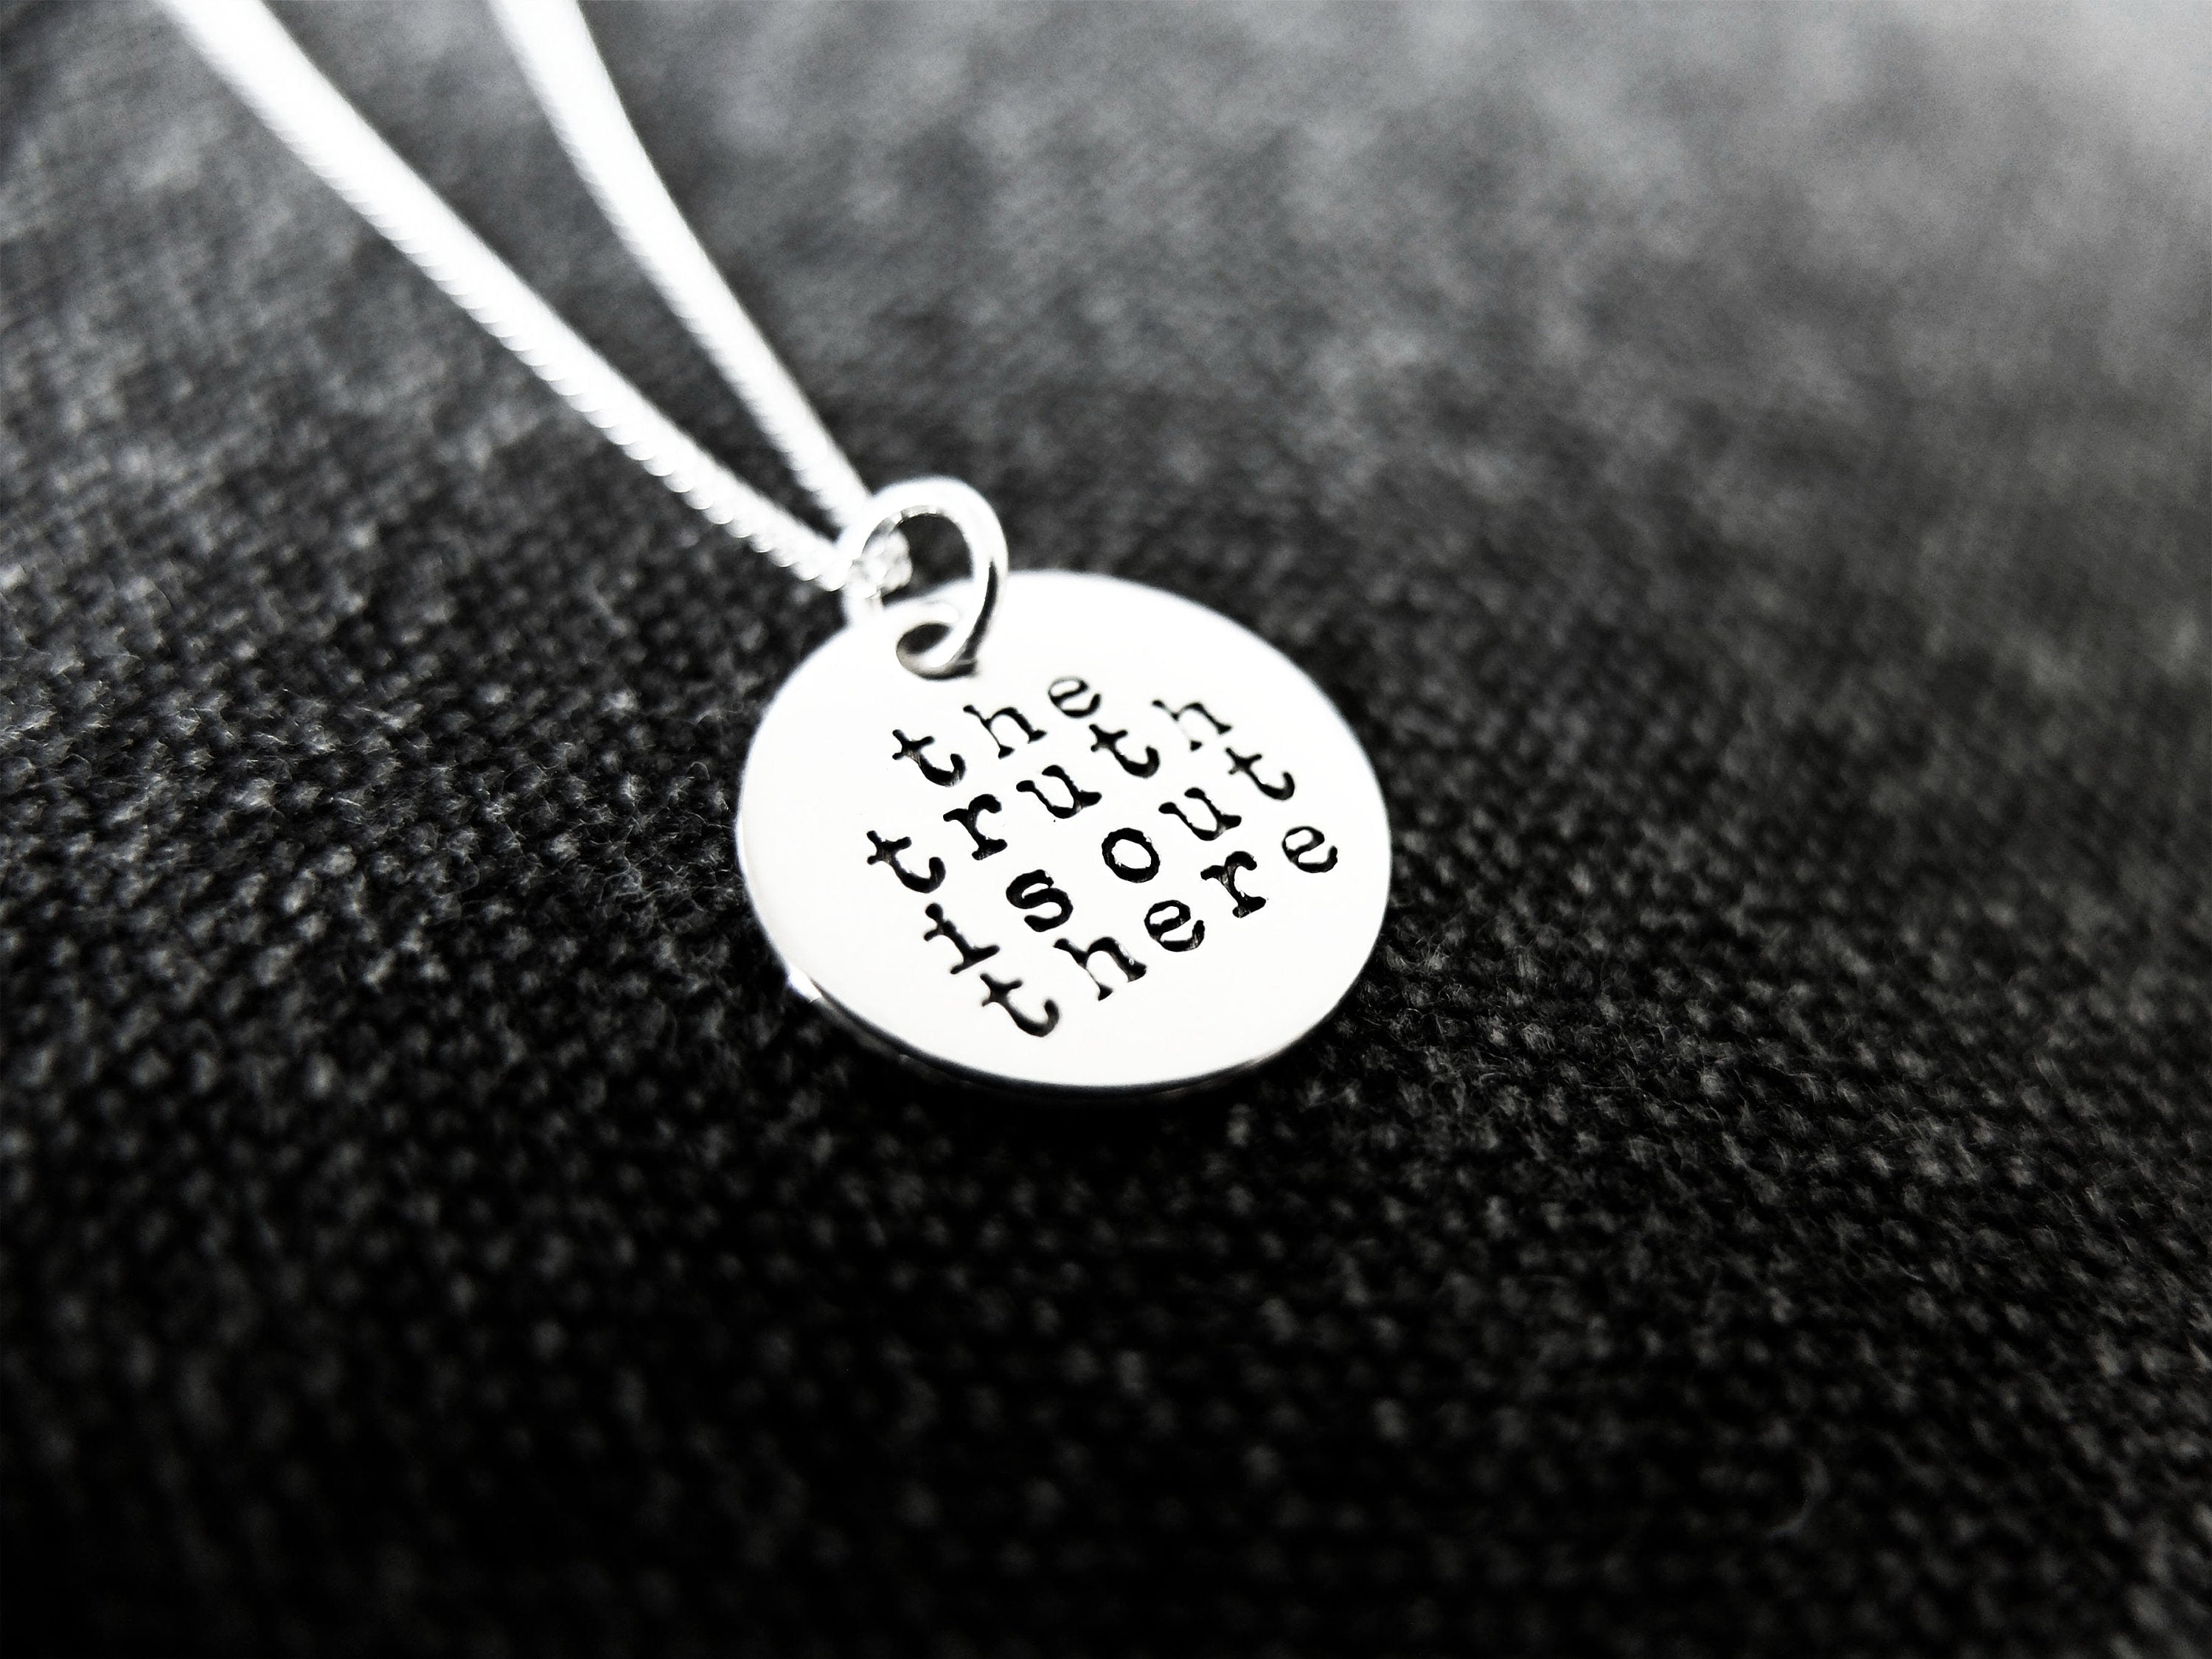 Sterling Silver Truth Is Out There Pendant - Handmade Mulder/Scully Necklace - X-Files Geek